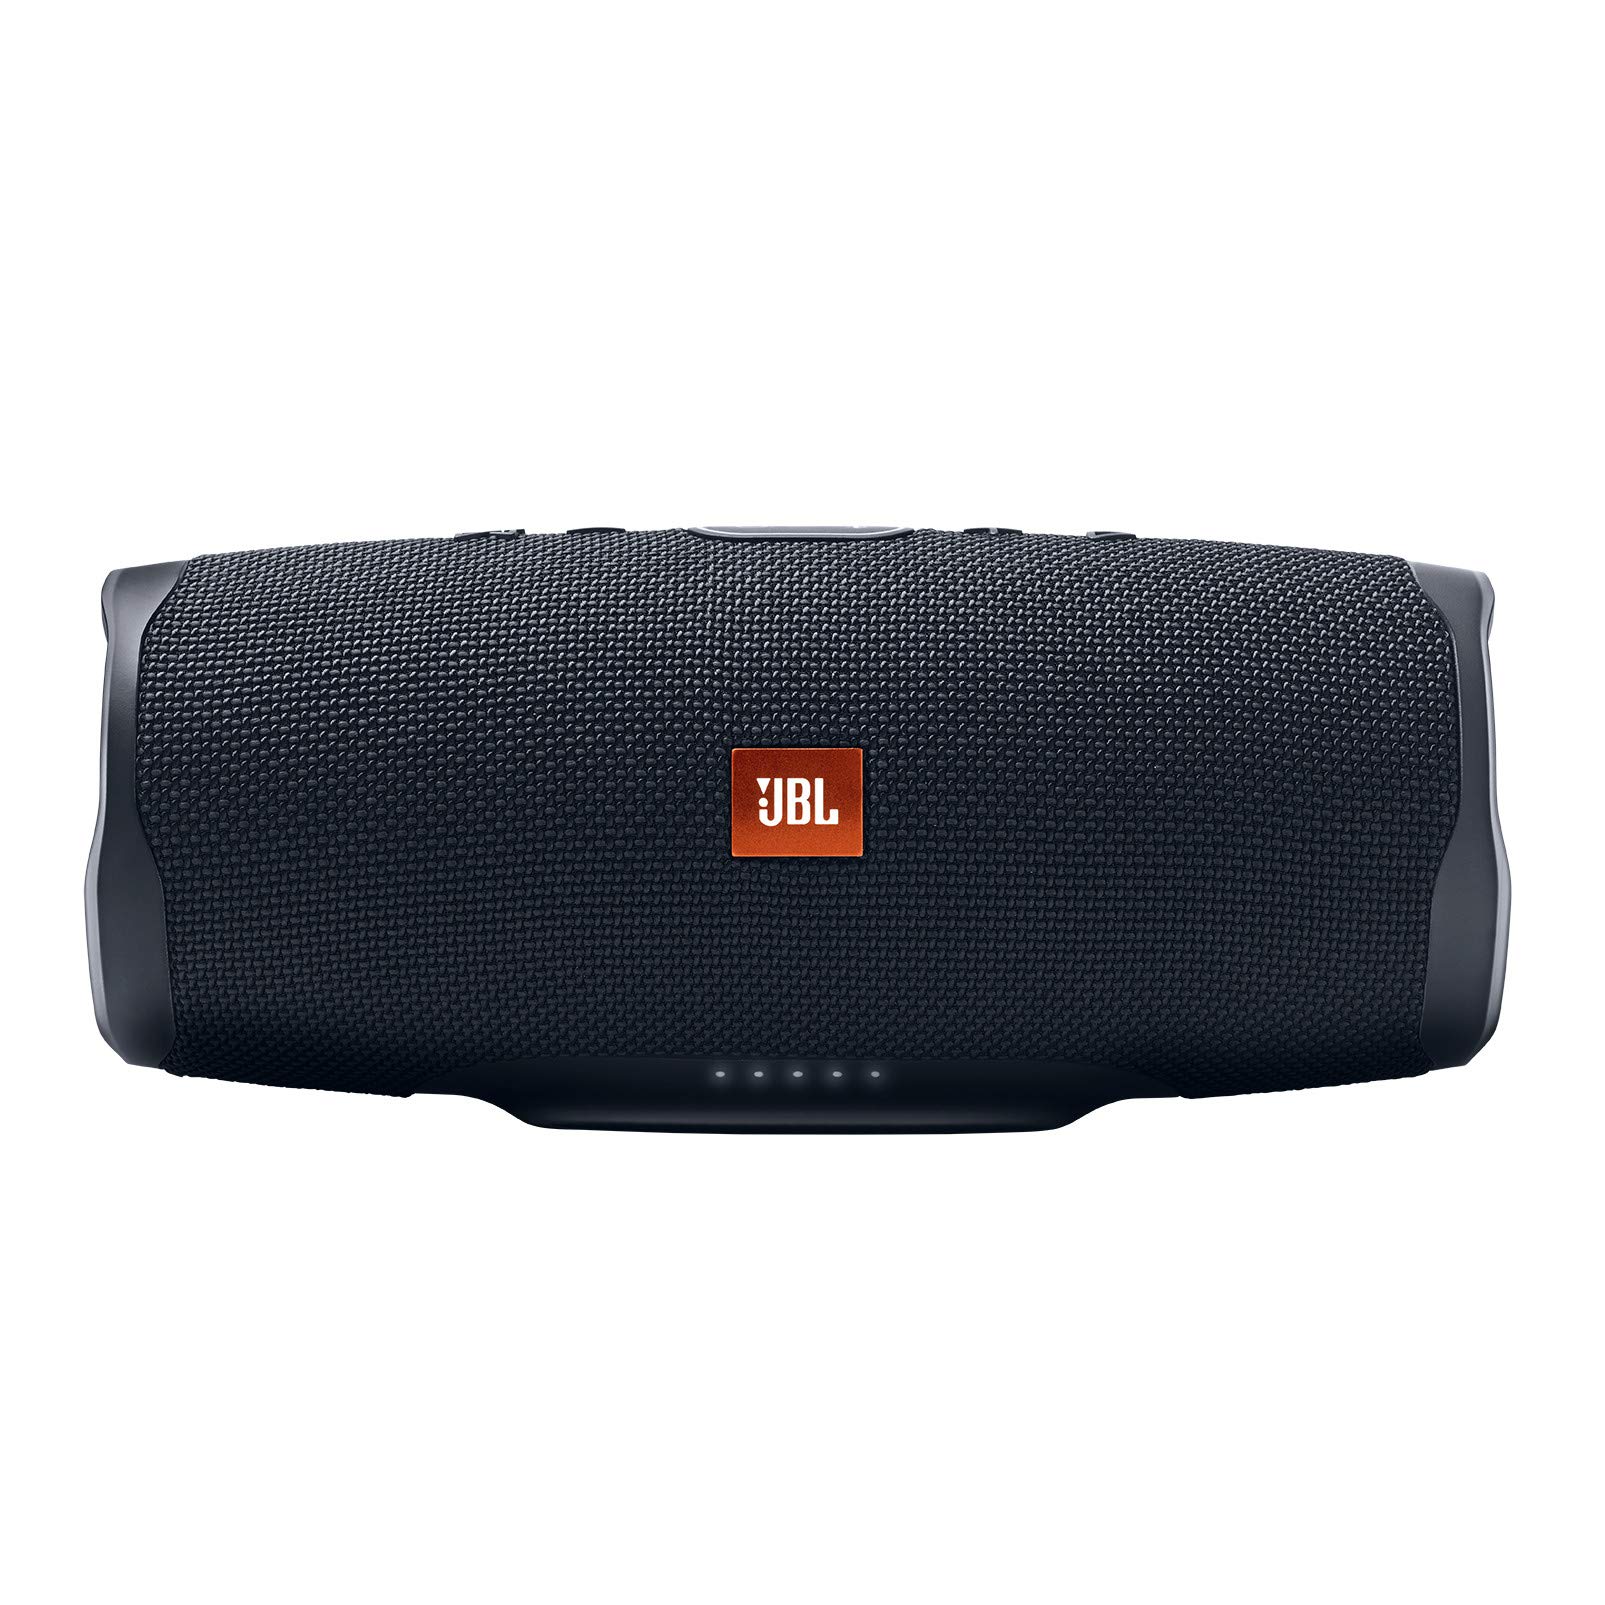 JBL Charge 4 Waterproof Portable Bluetooth Speaker with 20 Hour Battery